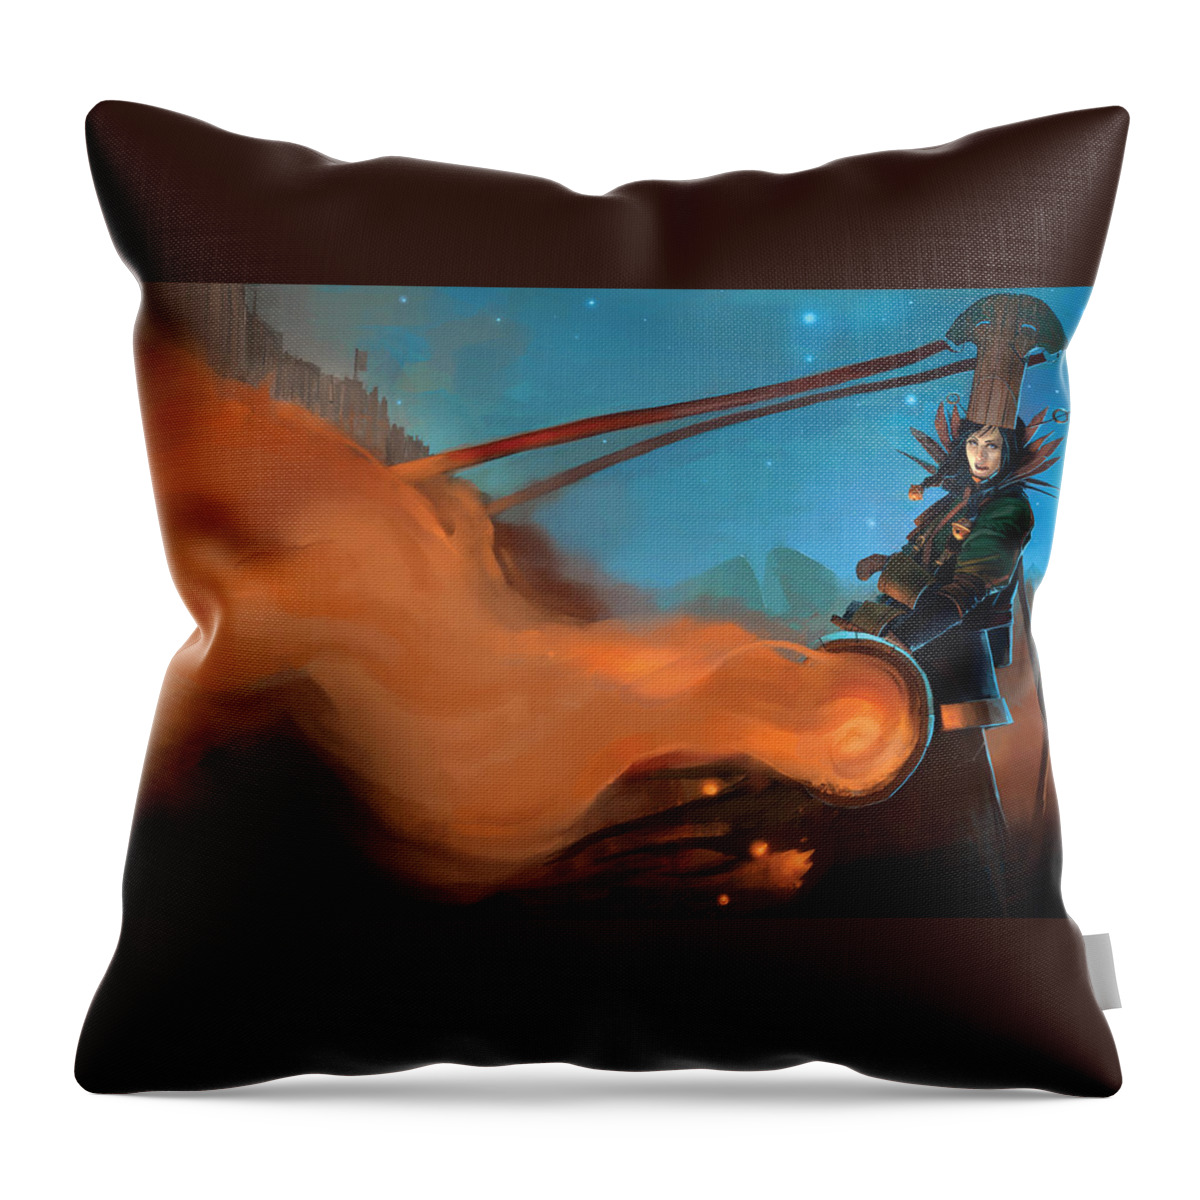 Bloodline Champions Throw Pillow featuring the digital art Bloodline Champions #1 by Super Lovely